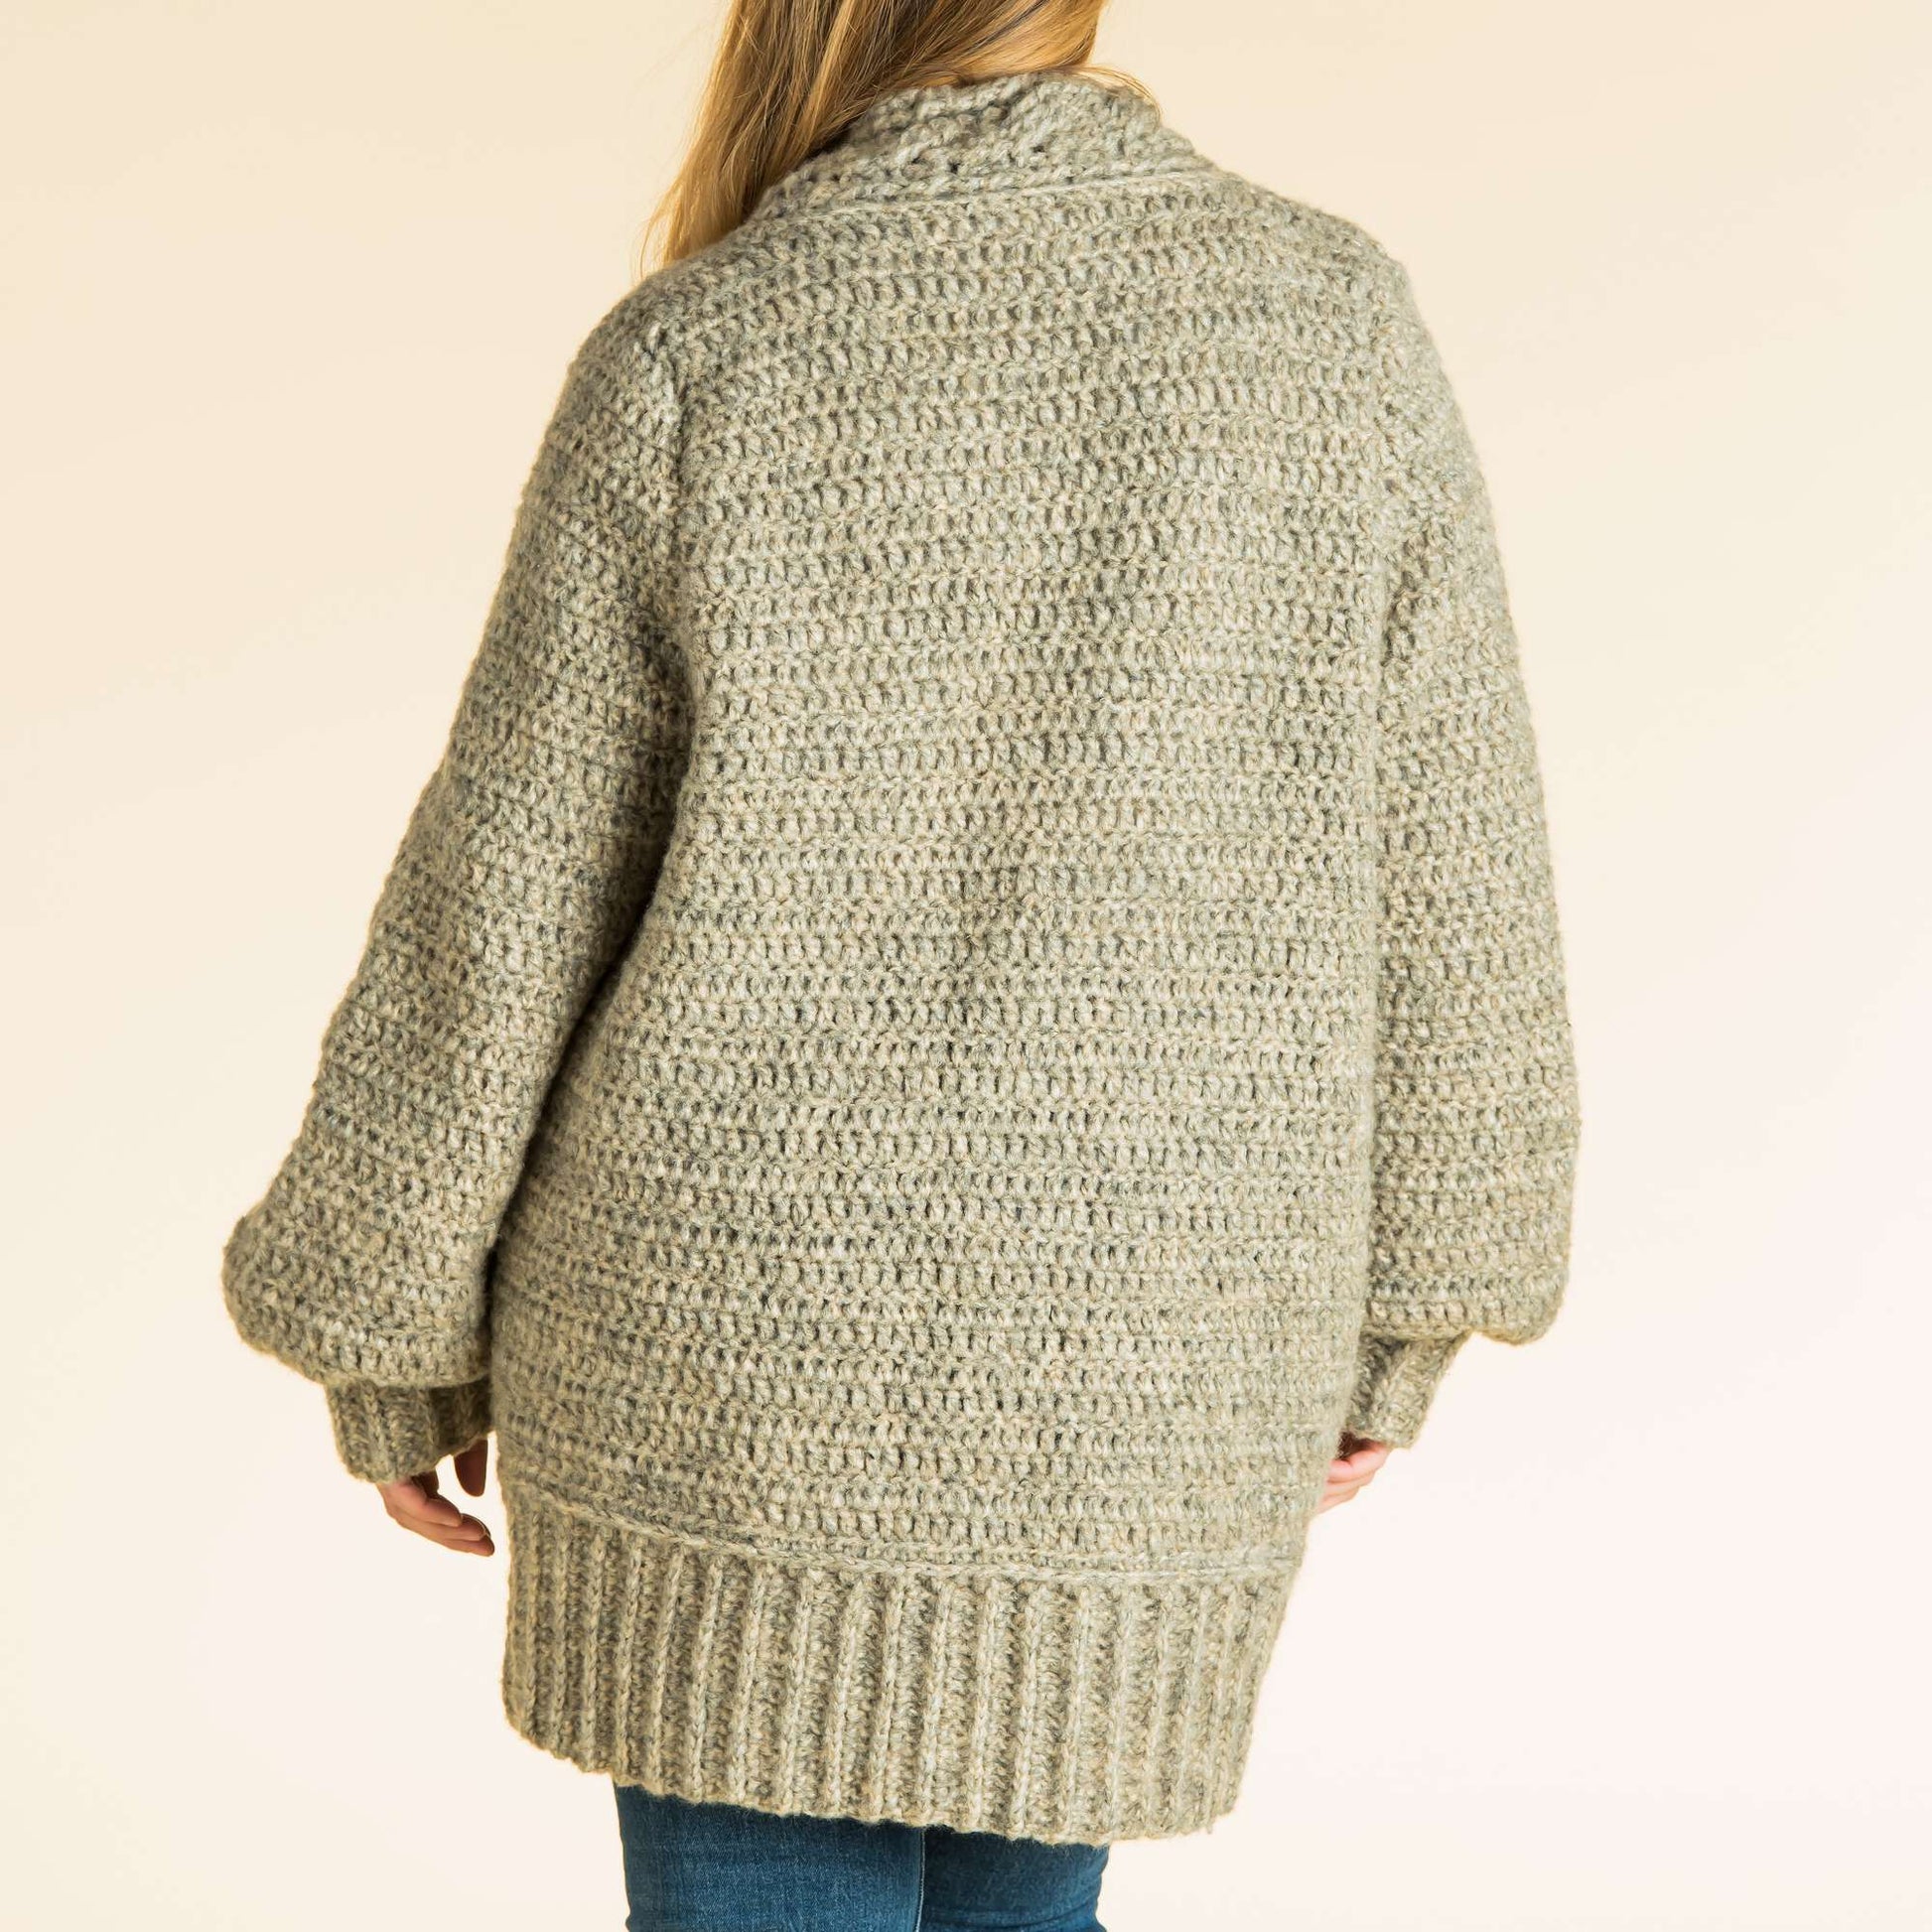 Free Patons Cozy Cabled Crochet Cardigan Pattern